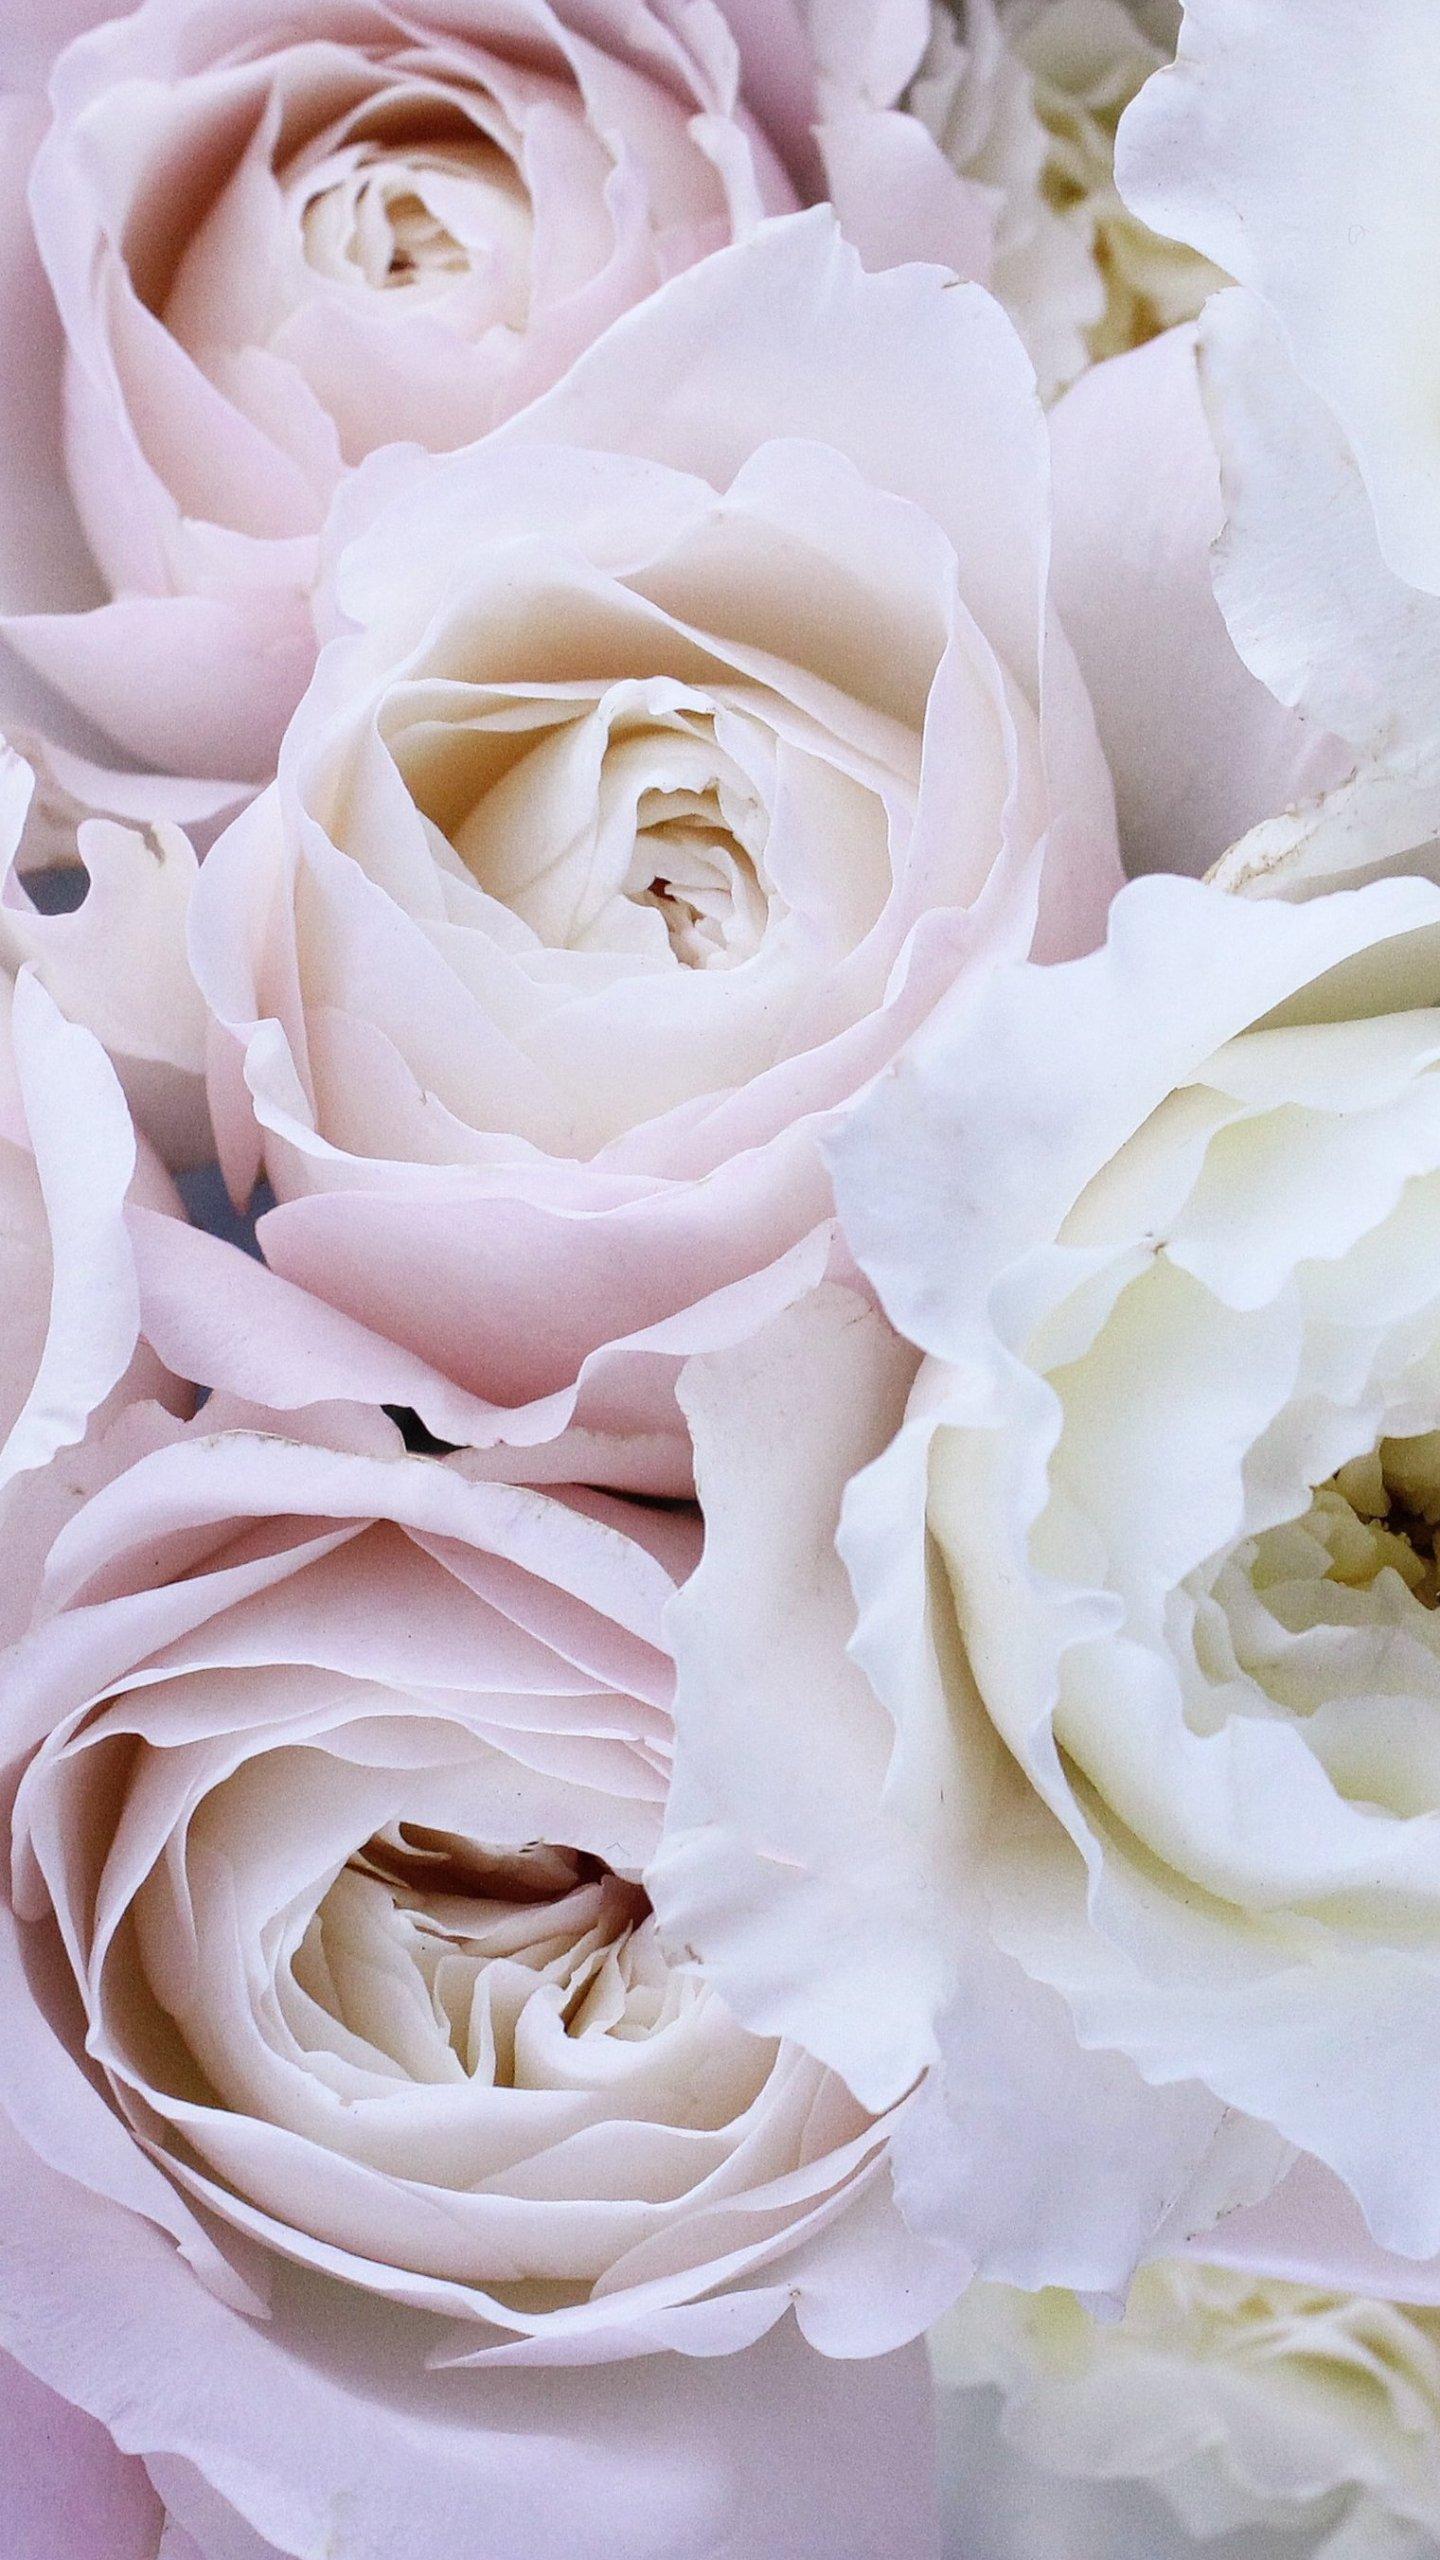 Pale Pink and White Roses Wallpaper, Android & Desktop Background